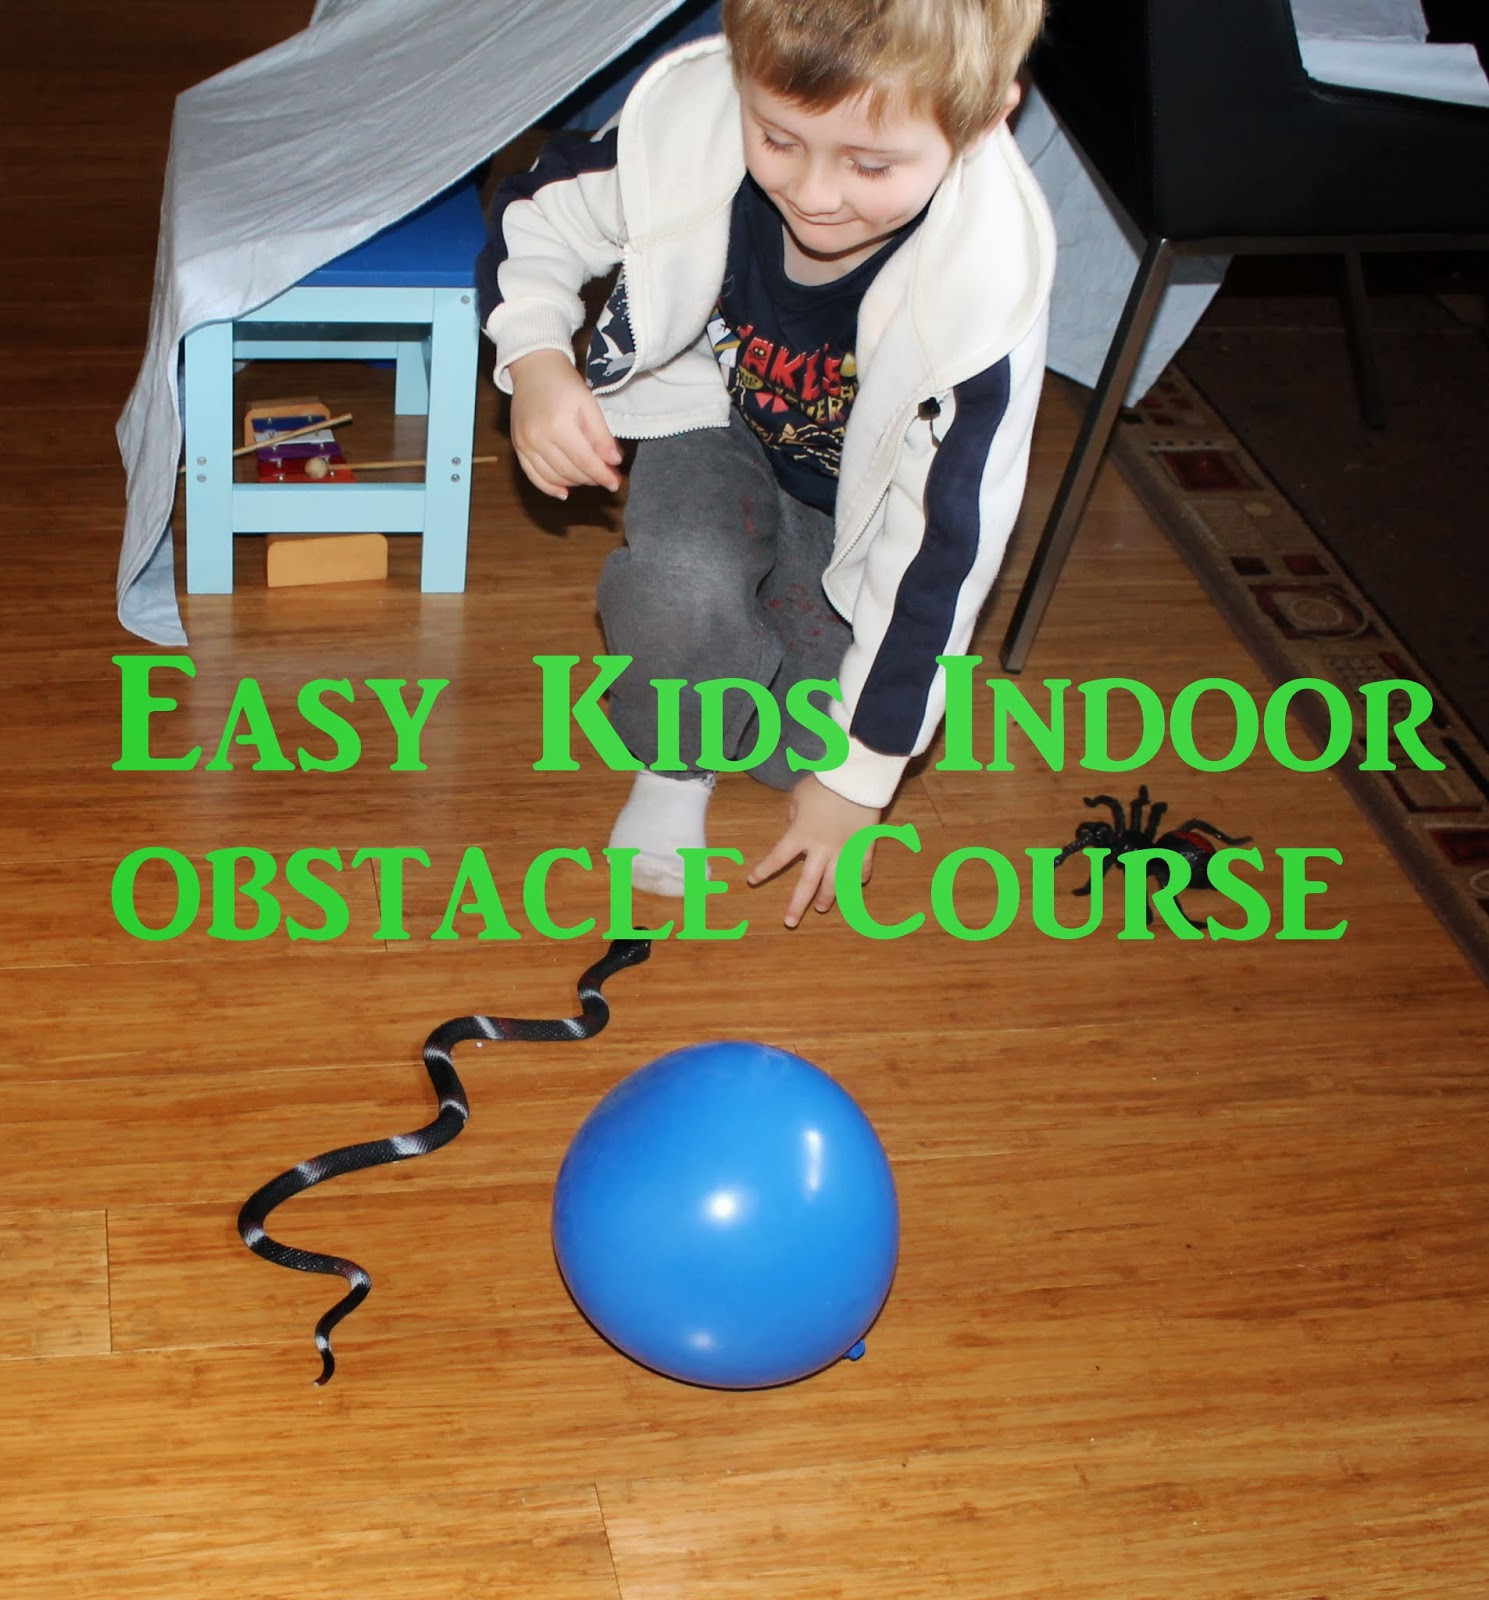 Indoor Obstacle Course For Kids
 Adventures at home with Mum Easy Kids Indoor Obstacle Course